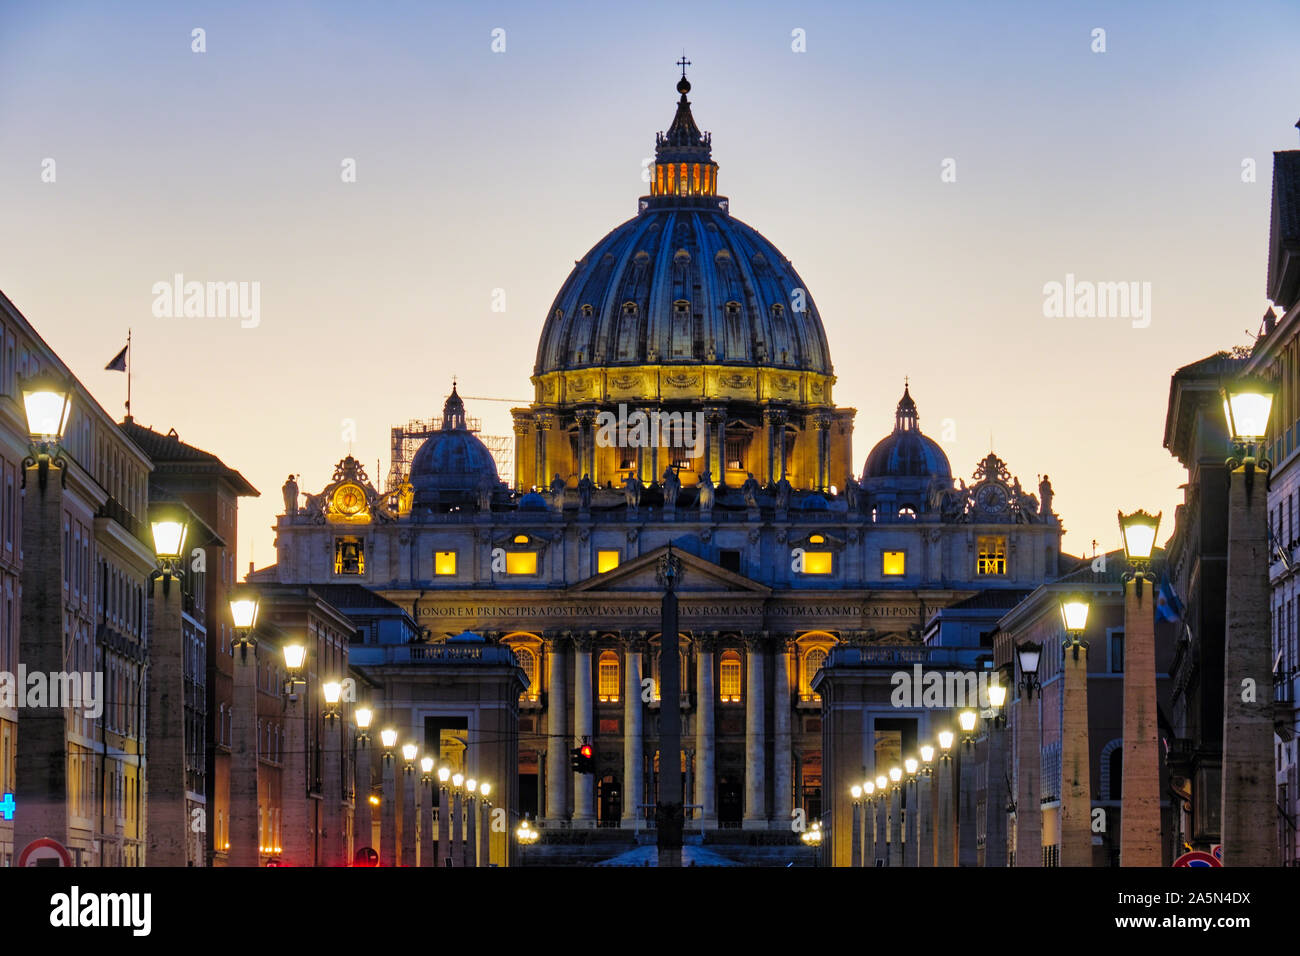 Low Angle View of the Papal Basilica of St Peter's at Night, Vatican City, Rome, Italy Stock Photo